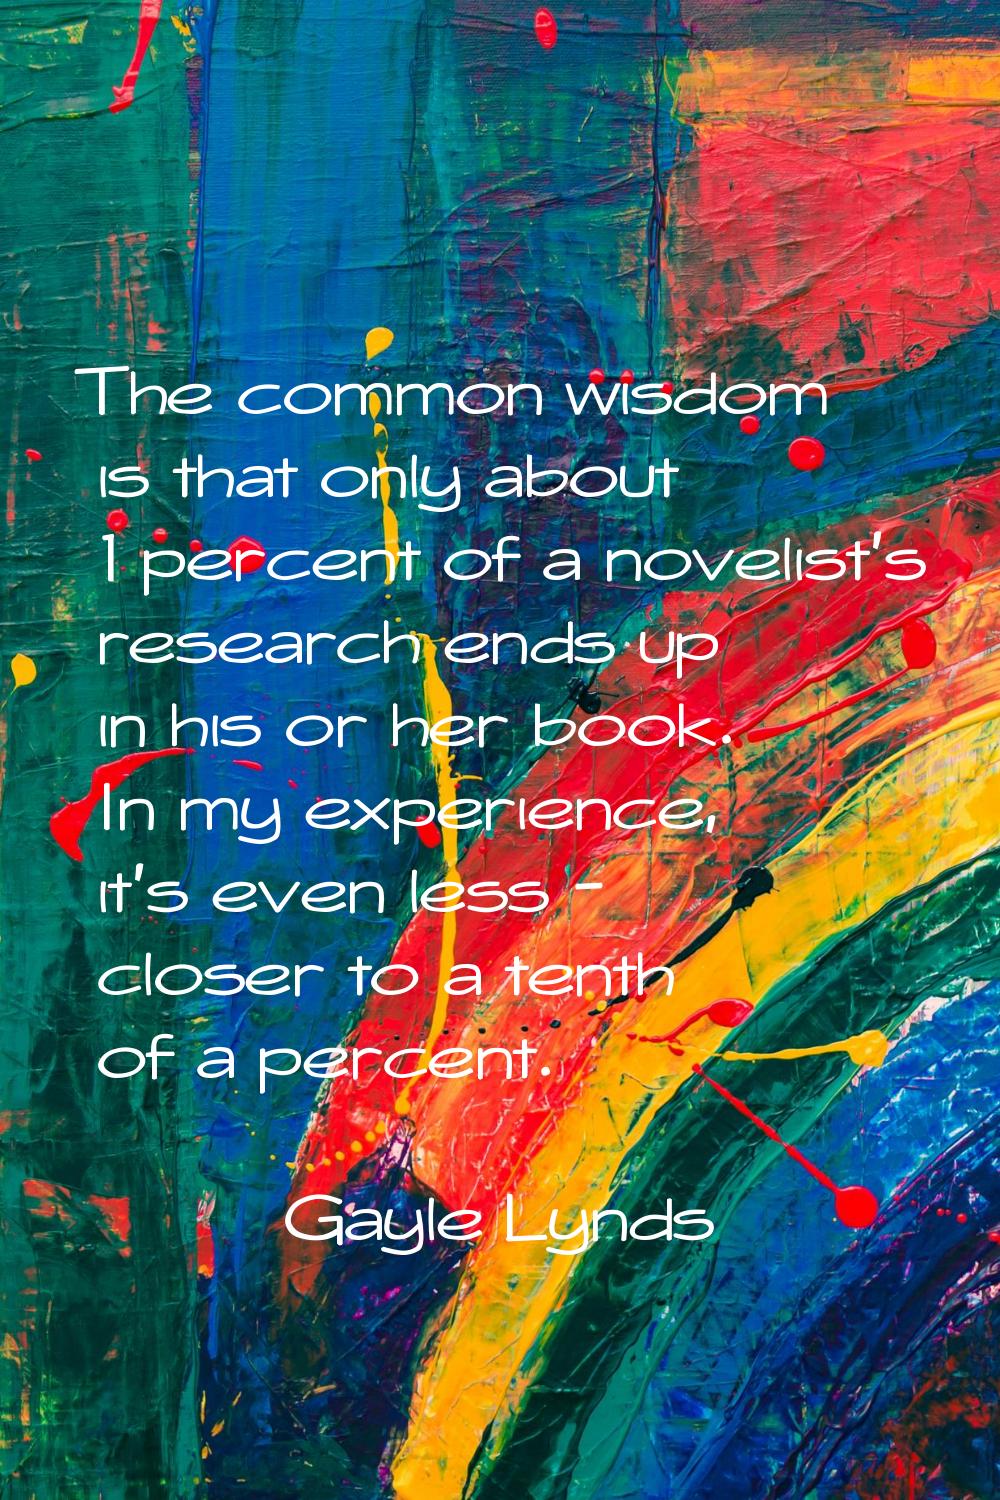 The common wisdom is that only about 1 percent of a novelist's research ends up in his or her book.